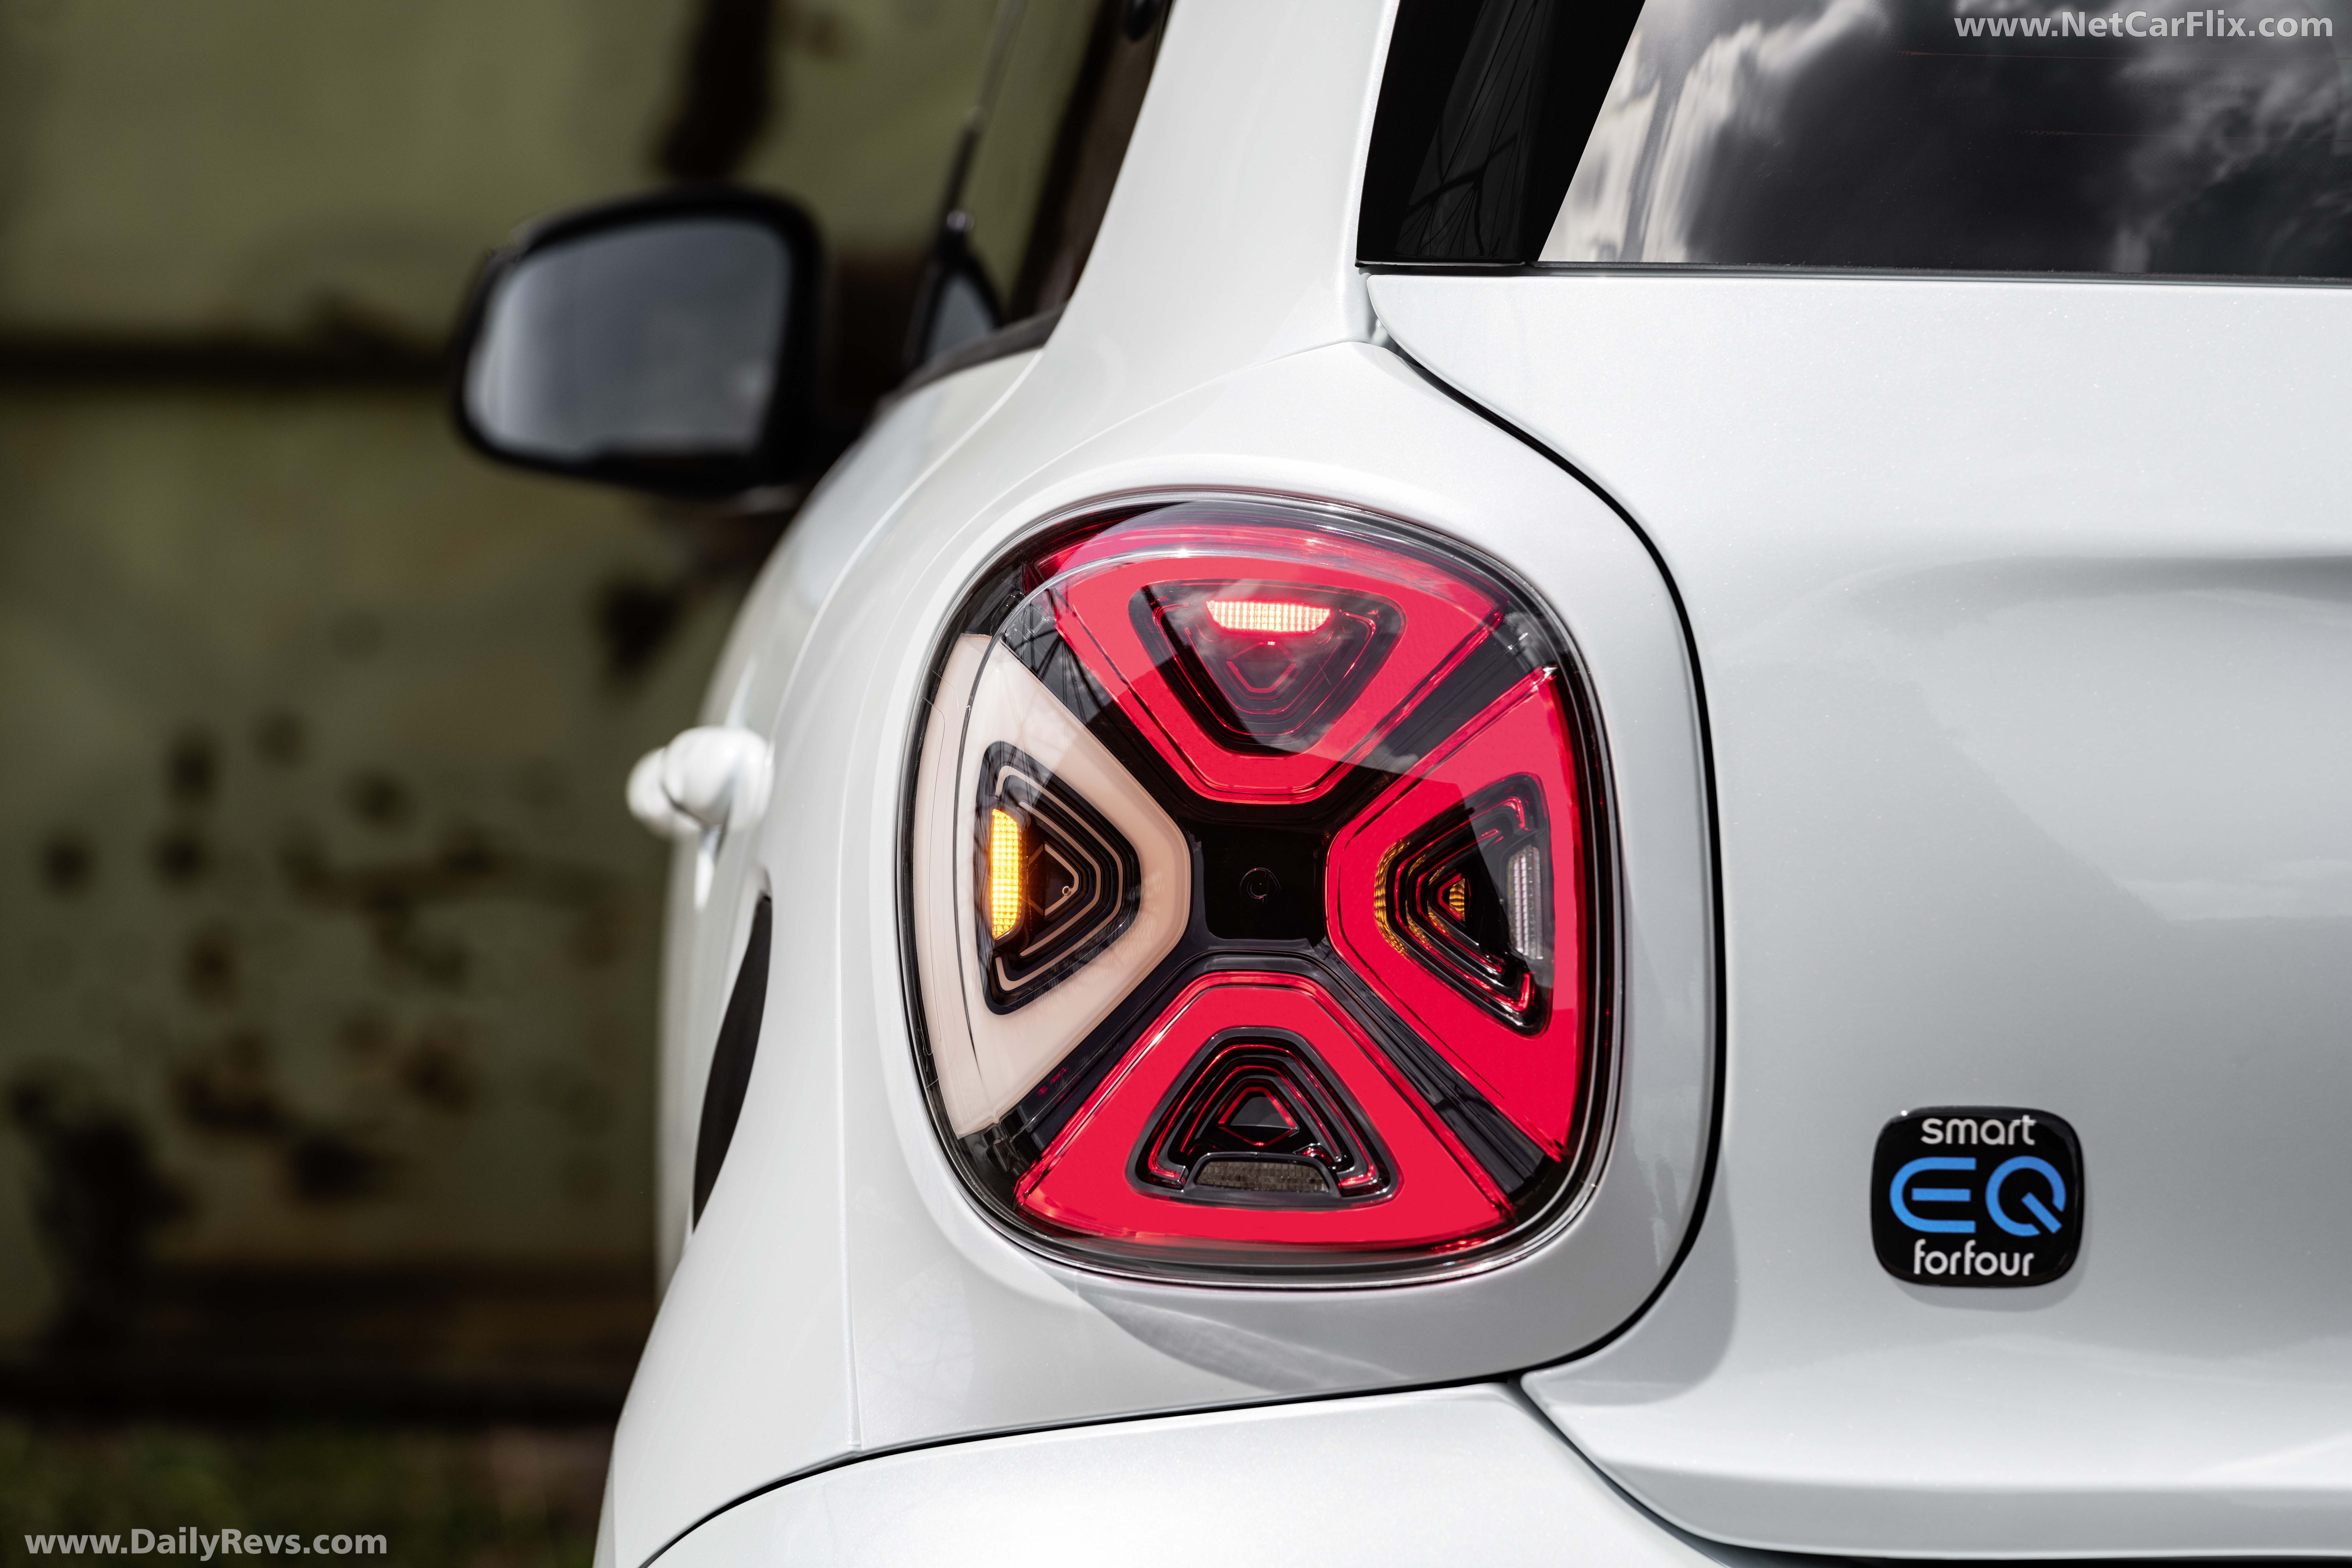 smart EQ forfour mod specifications